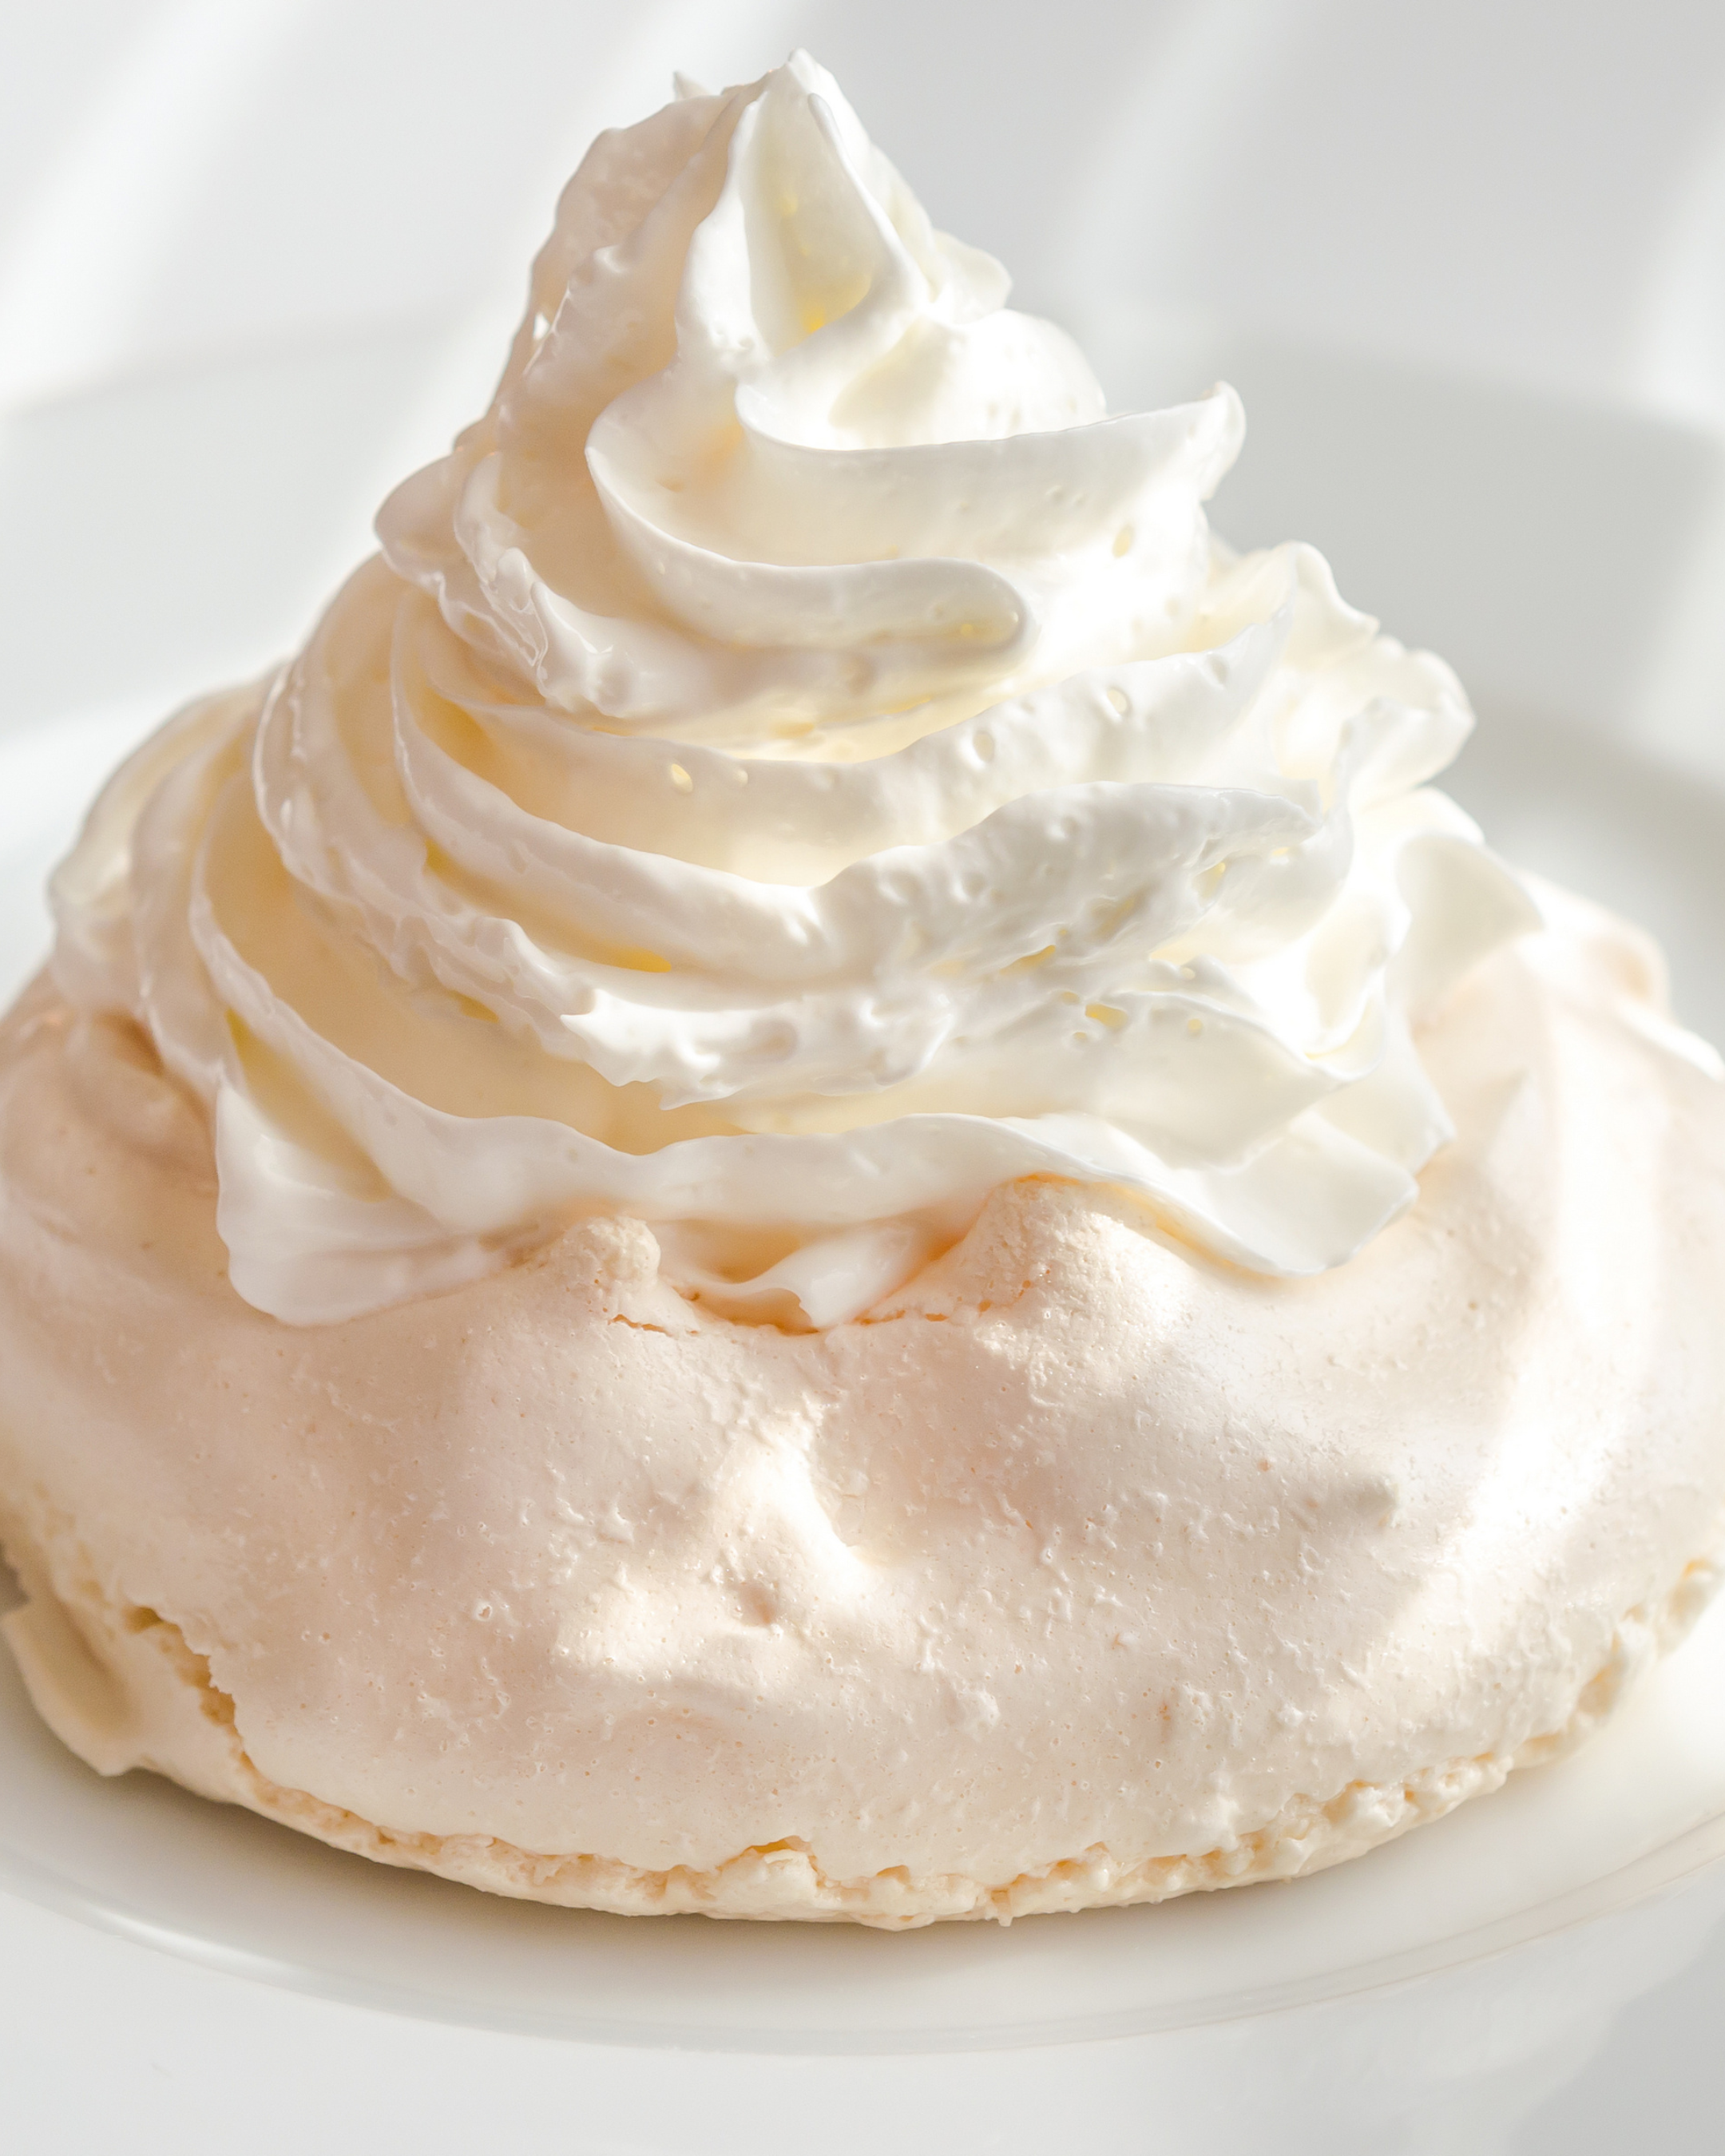 Chantilly cream (French whipped cream)